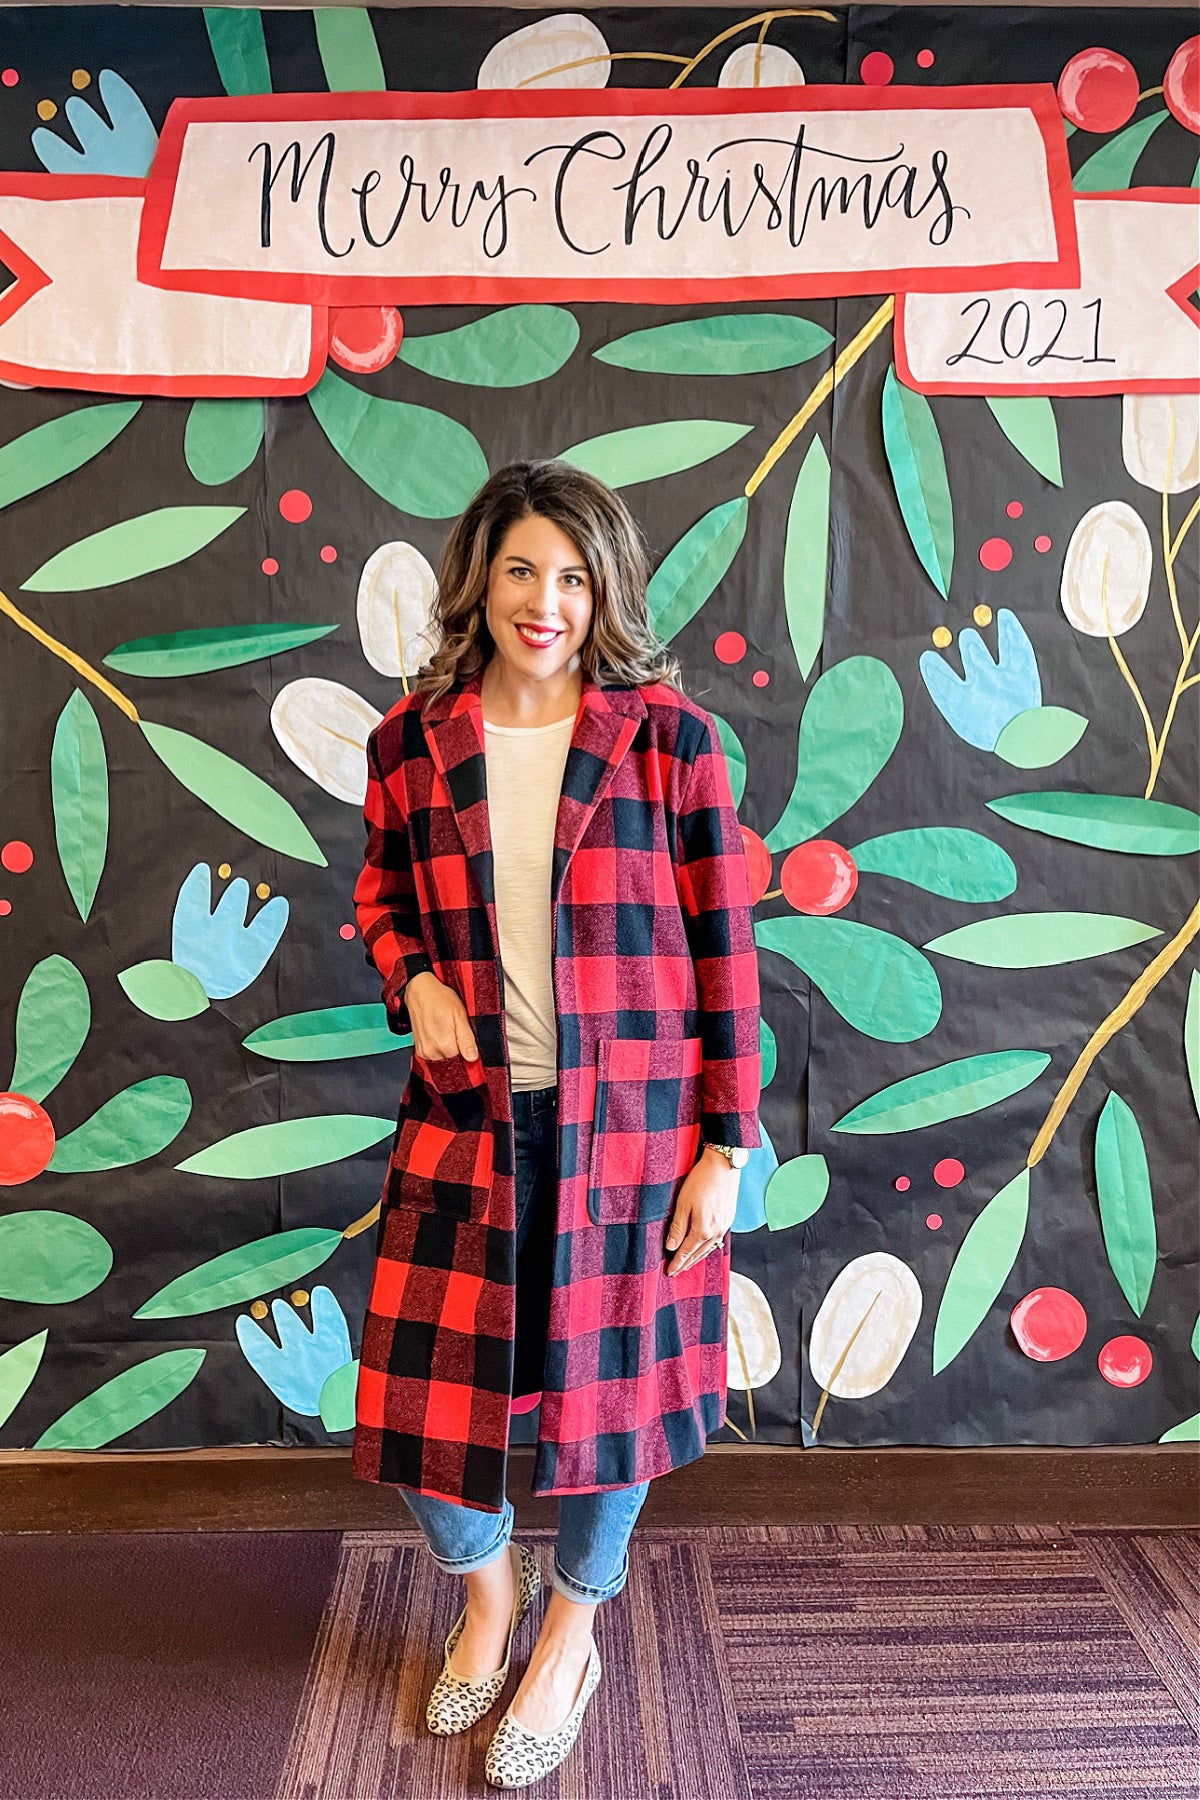 CHRISTMAS PHOTO BOOTH BACKDROP IDEAS (AND SOME CUTE WINTER FASHION STAPLES!)